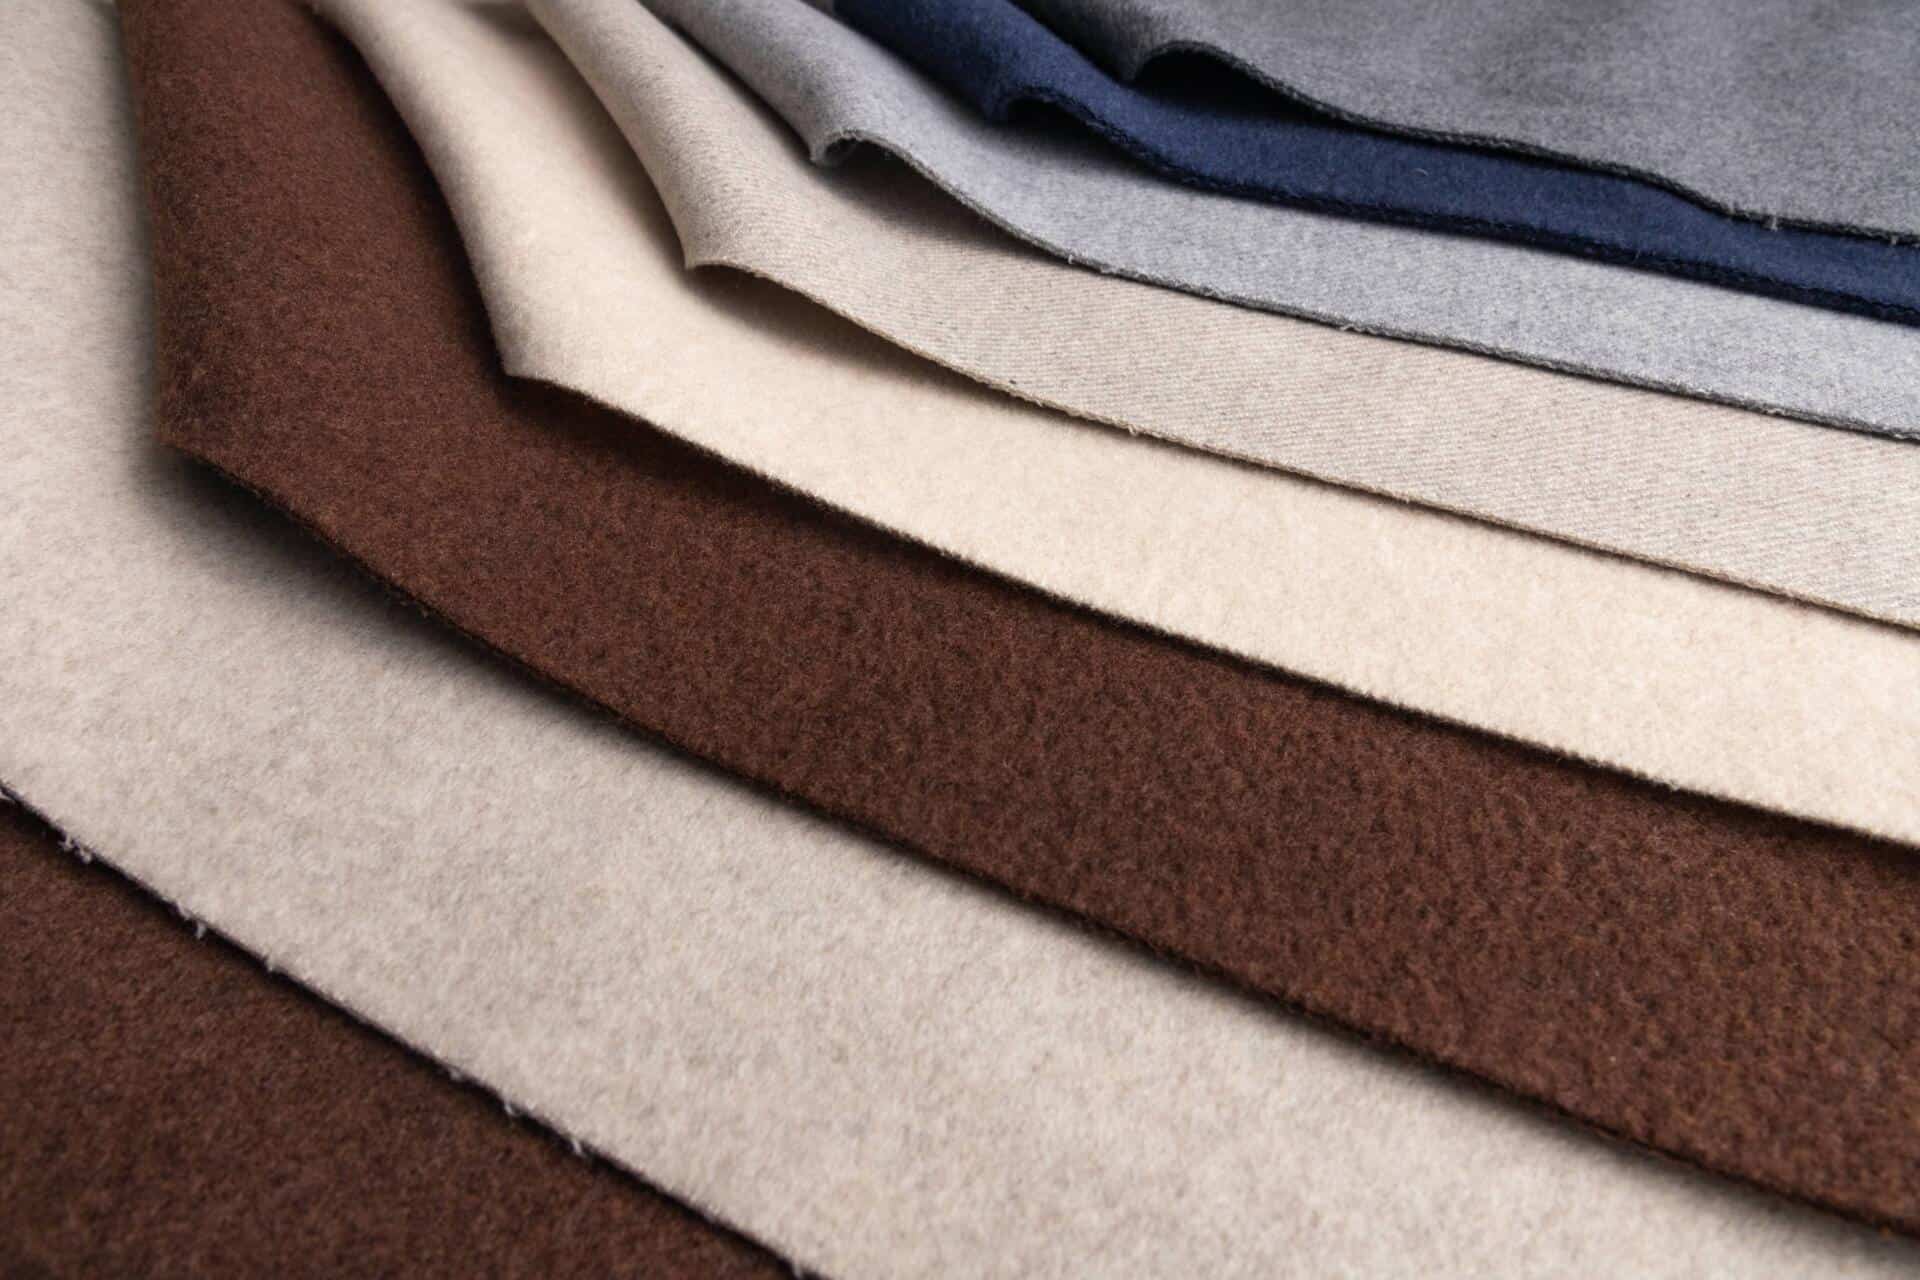 What is the difference between Worsted and Woolen textiles?